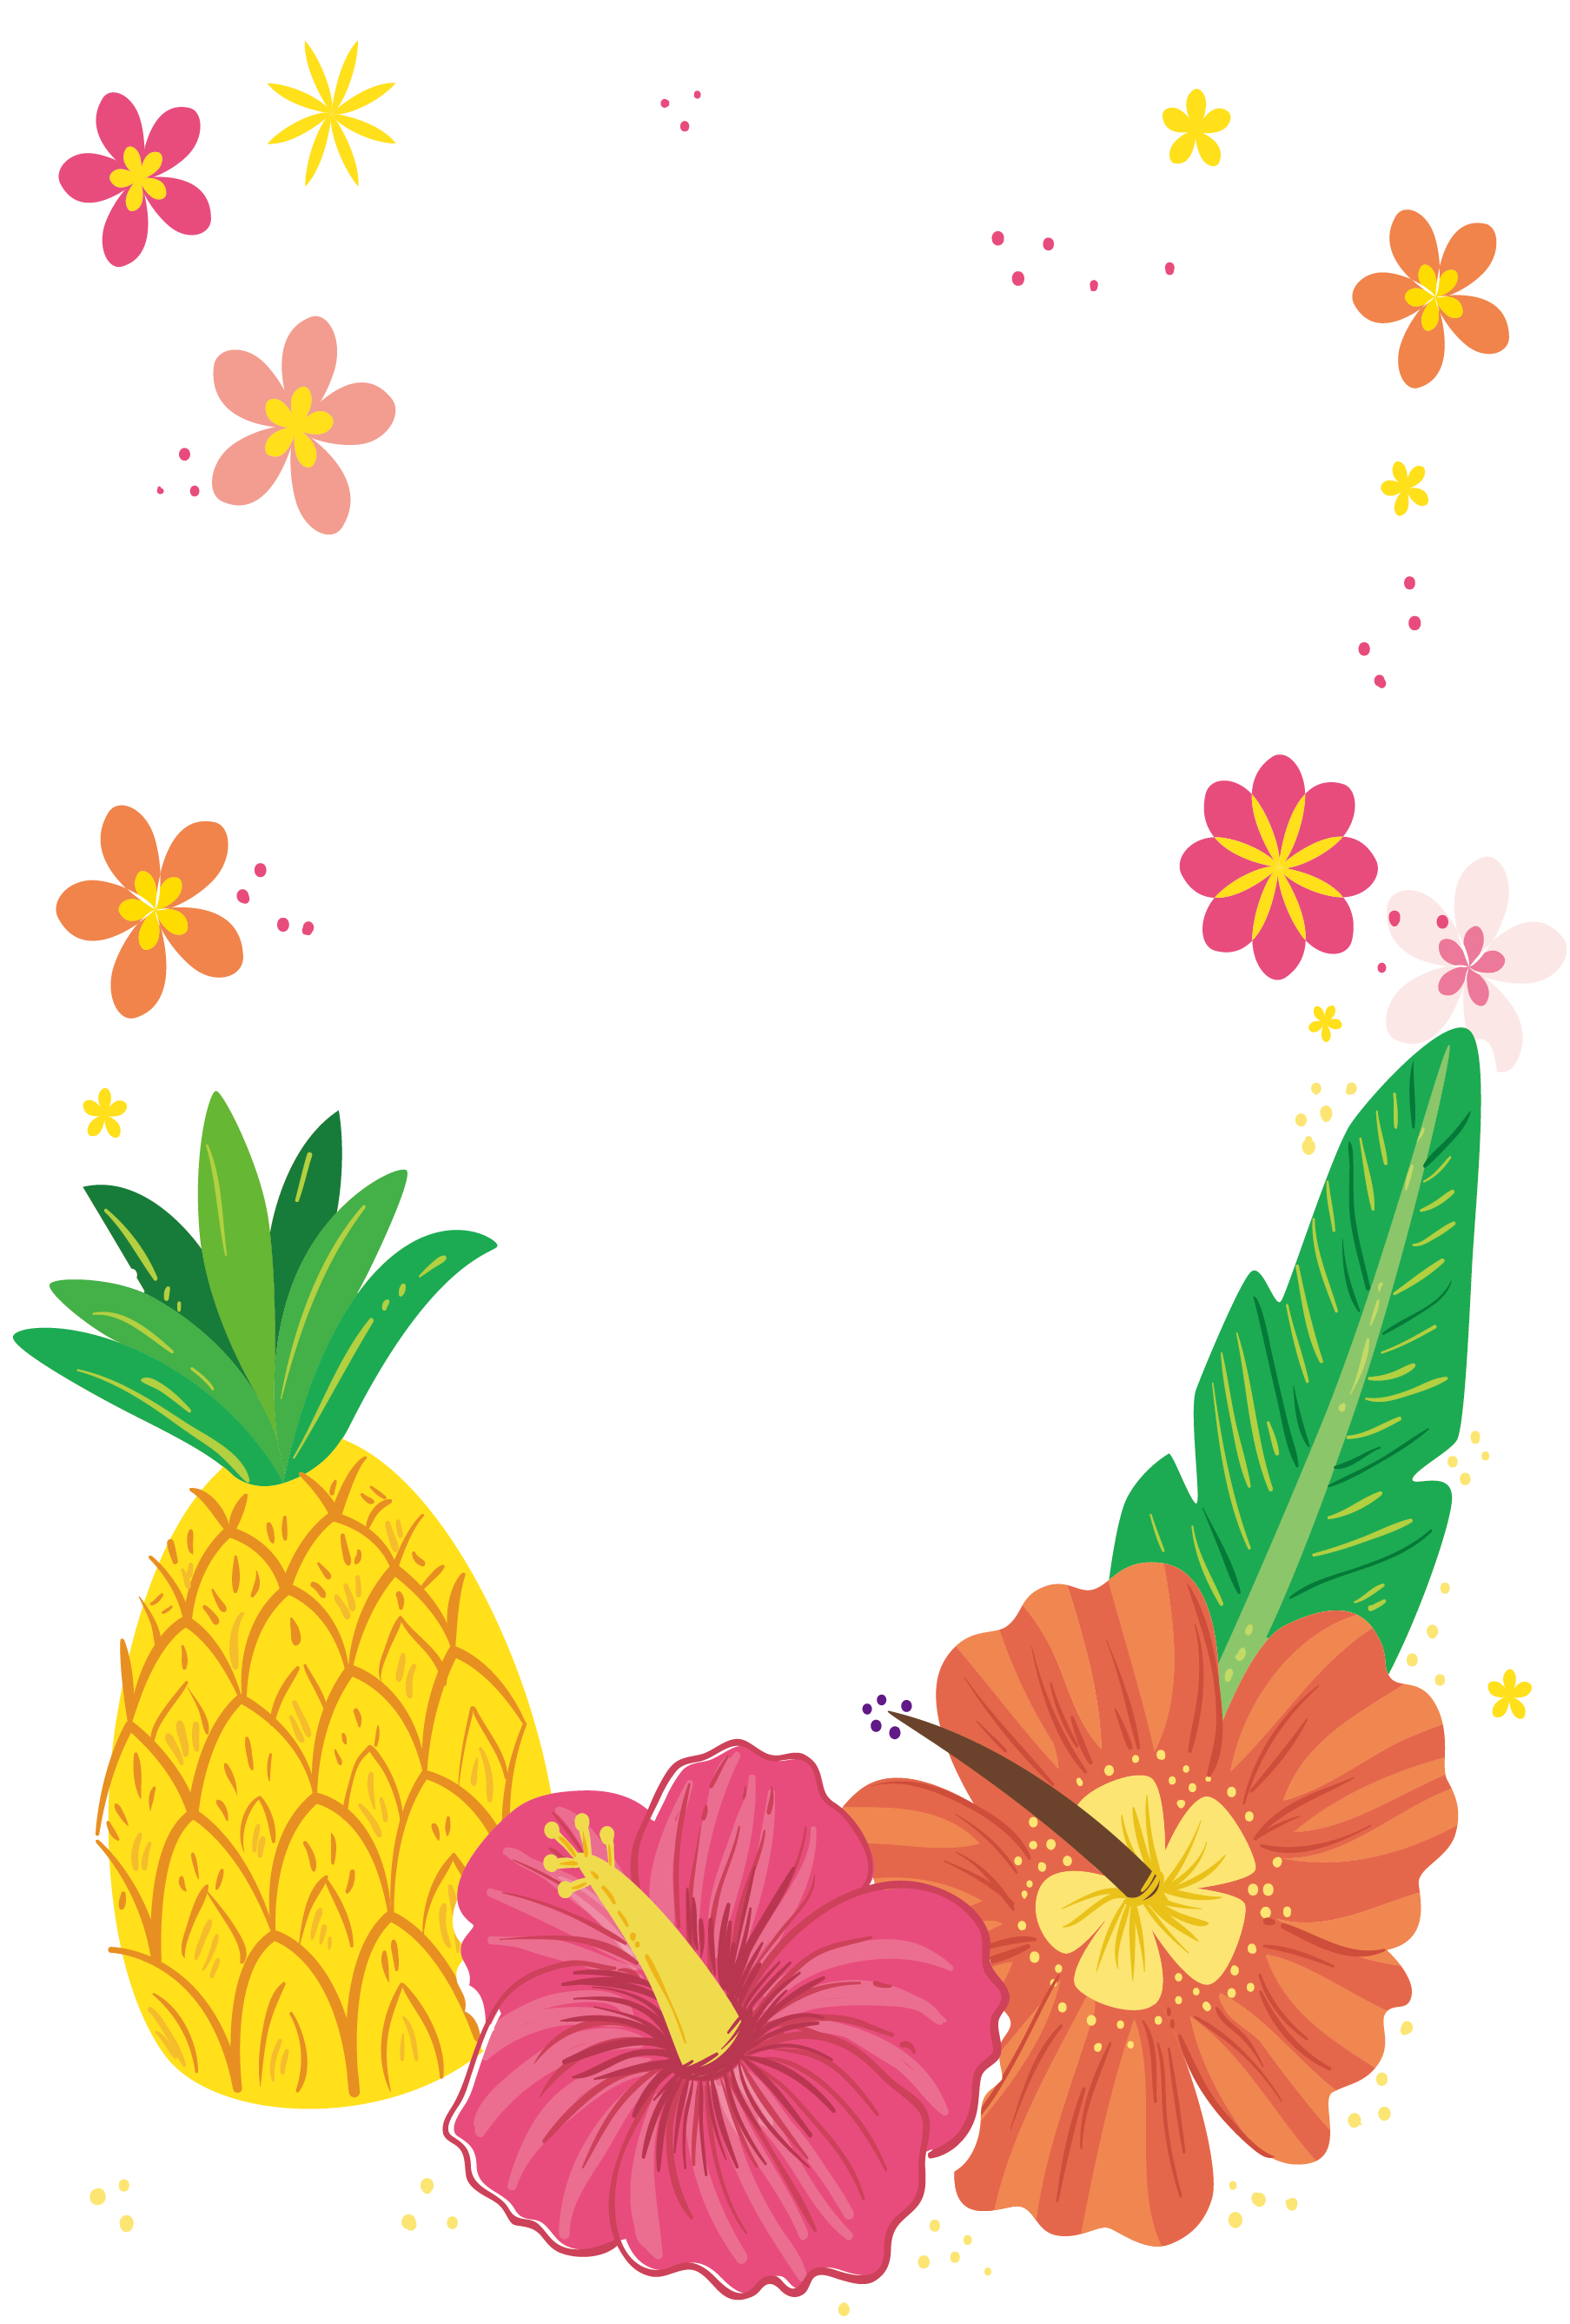 Pineapple clipart floral. Tropical colored flower decorative